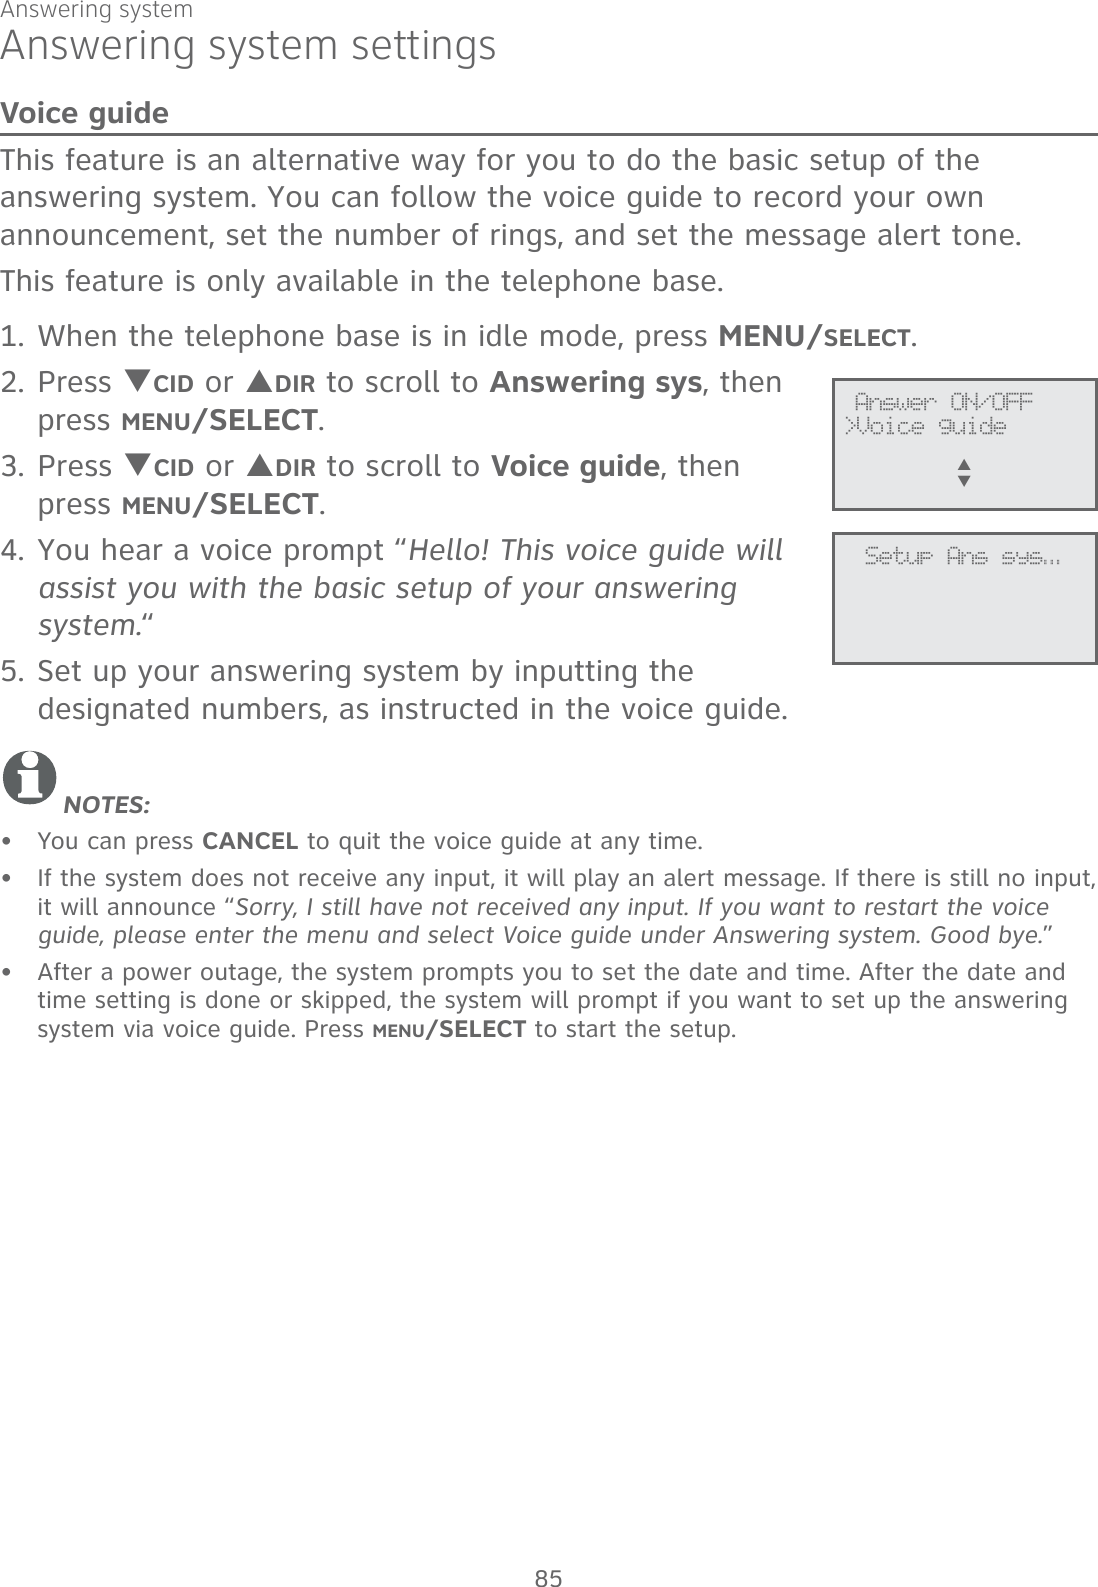 Answering system85Answering system settingsVoice guideThis feature is an alternative way for you to do the basic setup of the answering system. You can follow the voice guide to record your own announcement, set the number of rings, and set the message alert tone.This feature is only available in the telephone base.When the telephone base is in idle mode, press MENU/SELECT.Press TCID or SDIR to scroll to Answering sys, then press MENU/SELECT.Press TCID or SDIR to scroll to Voice guide, then  press MENU/SELECT.You hear a voice prompt “Hello! This voice guide will assist you with the basic setup of your answering system.“Set up your answering system by inputting the designated numbers, as instructed in the voice guide.NOTES:You can press CANCEL to quit the voice guide at any time.If the system does not receive any input, it will play an alert message. If there is still no input, it will announce “Sorry, I still have not received any input. If you want to restart the voice guide, please enter the menu and select Voice guide under Answering system. Good bye.”After a power outage, the system prompts you to set the date and time. After the date and time setting is done or skipped, the system will prompt if you want to set up the answering system via voice guide. Press MENU/SELECT to start the setup.1.2.3.4.5.•••              Answer ON/OFF&gt;Voice guideS      T             Setup Ans sys...